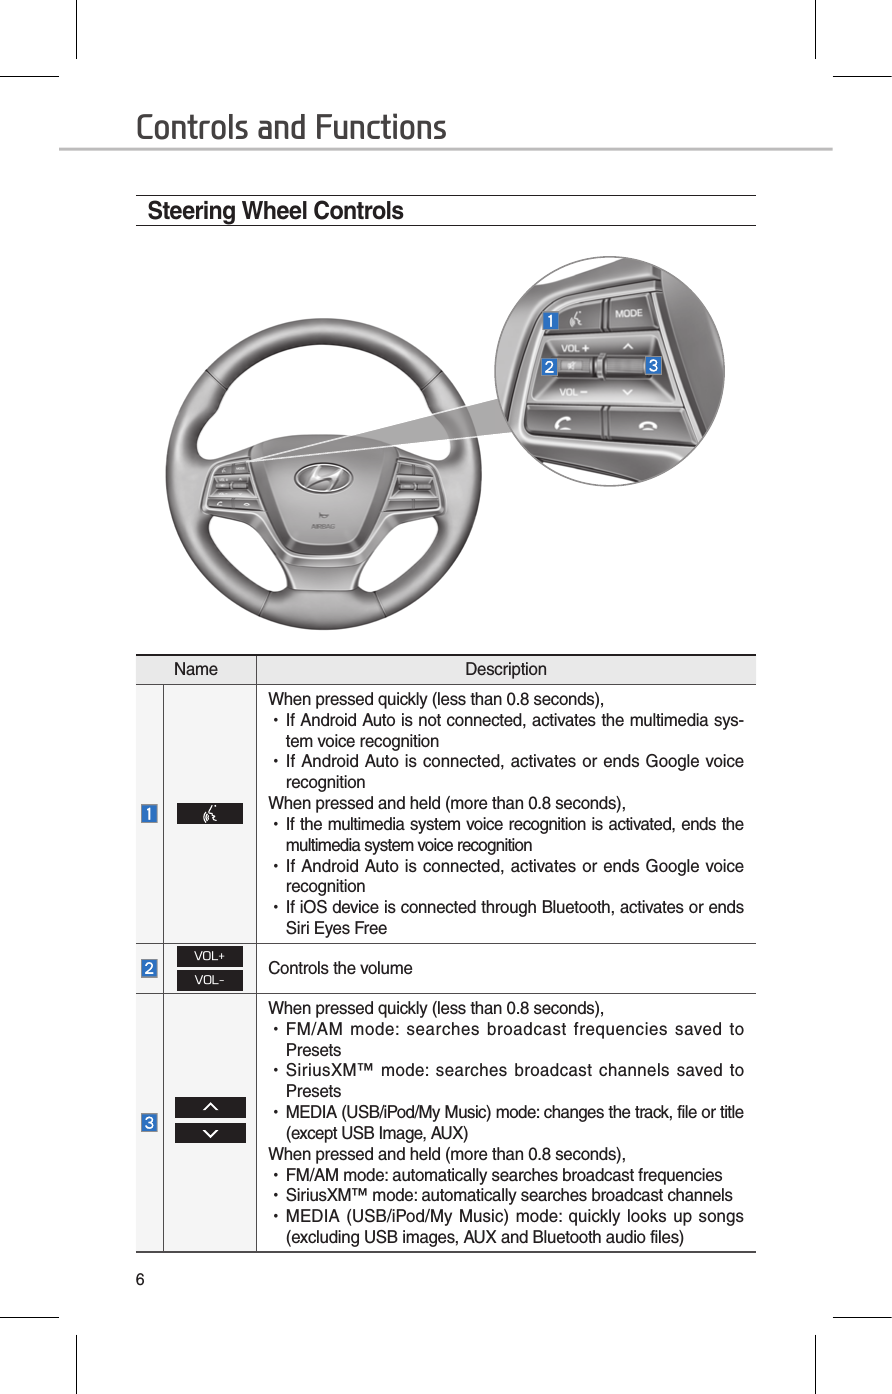 6Steering Wheel ControlsName DescriptionWhen pressed quickly (less than 0.8 seconds), •If Android Auto is not connected, activates the multimedia sys-tem voice recognition •If Android Auto is connected, activates or ends Google voice recognitionWhen pressed and held (more than 0.8 seconds), •If the multimedia system voice recognition is activated, ends the multimedia system voice recognition •If Android Auto is connected, activates or ends Google voice recognition •If iOS device is connected through Bluetooth, activates or ends Siri Eyes FreeVOL+VOL-Controls the volume  When pressed quickly (less than 0.8 seconds), •FM/AM  mode: searches  broadcast frequencies  saved  to Presets •SiriusXM™  mode: searches  broadcast channels  saved to Presets •MEDIA (USB/iPod/My Music) mode: changes the track, file or title (except USB Image, AUX)When pressed and held (more than 0.8 seconds), •FM/AM mode: automatically searches broadcast frequencies •SiriusXM™ mode: automatically searches broadcast channels •MEDIA (USB/iPod/My Music) mode: quickly looks up  songs (excluding USB images, AUX and Bluetooth audio files)Controls and Functions